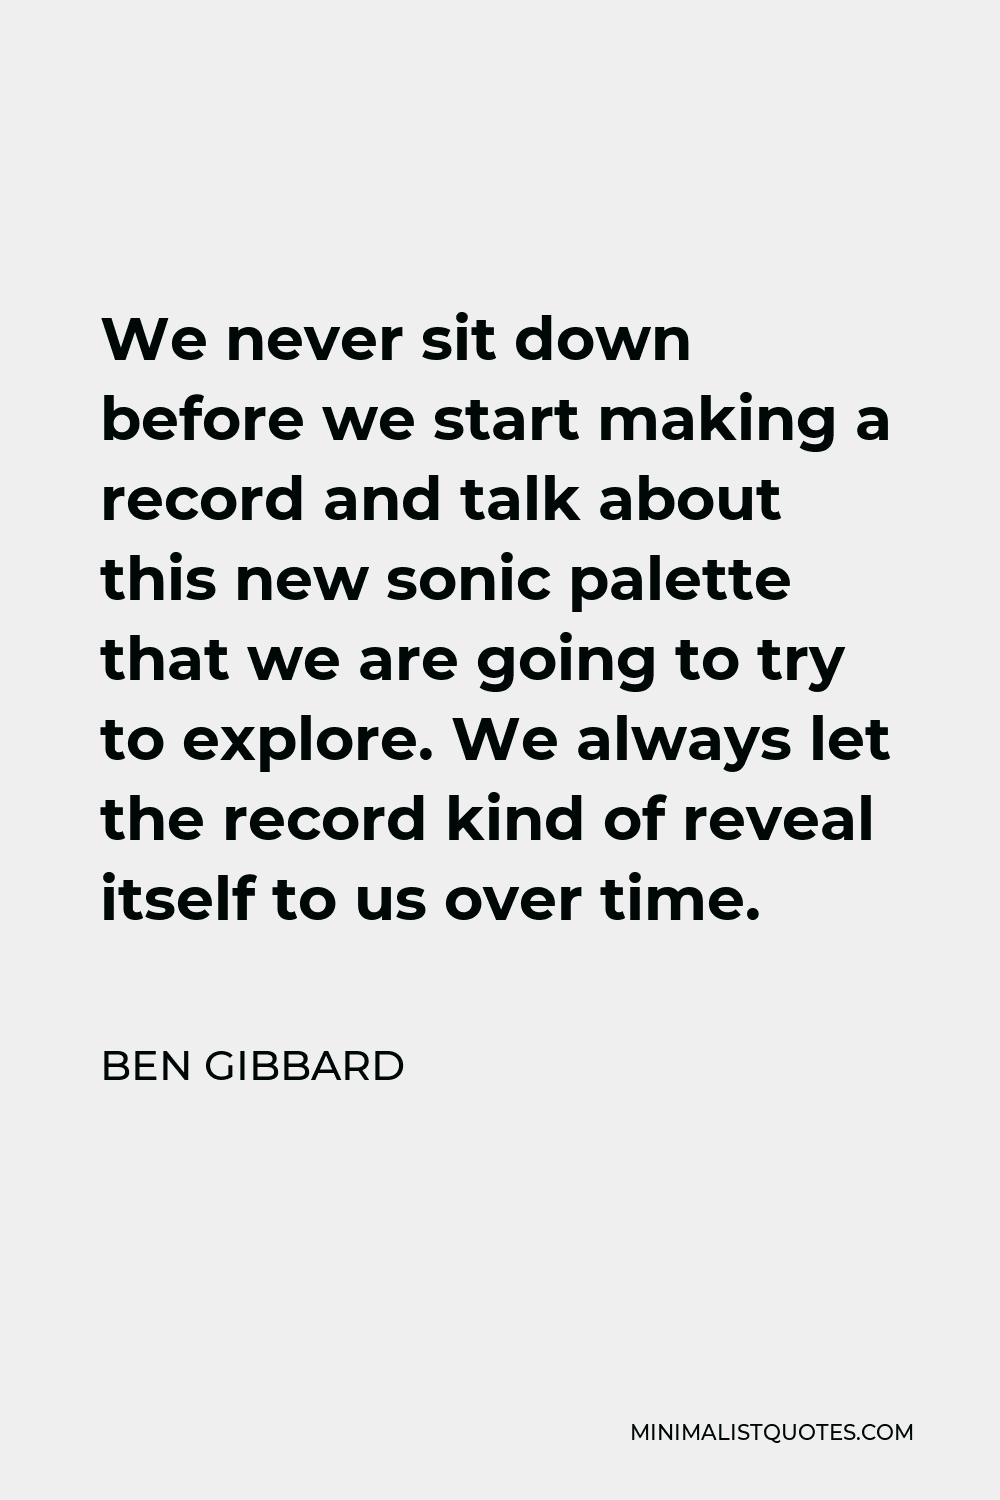 Ben Gibbard Quote - We never sit down before we start making a record and talk about this new sonic palette that we are going to try to explore. We always let the record kind of reveal itself to us over time.